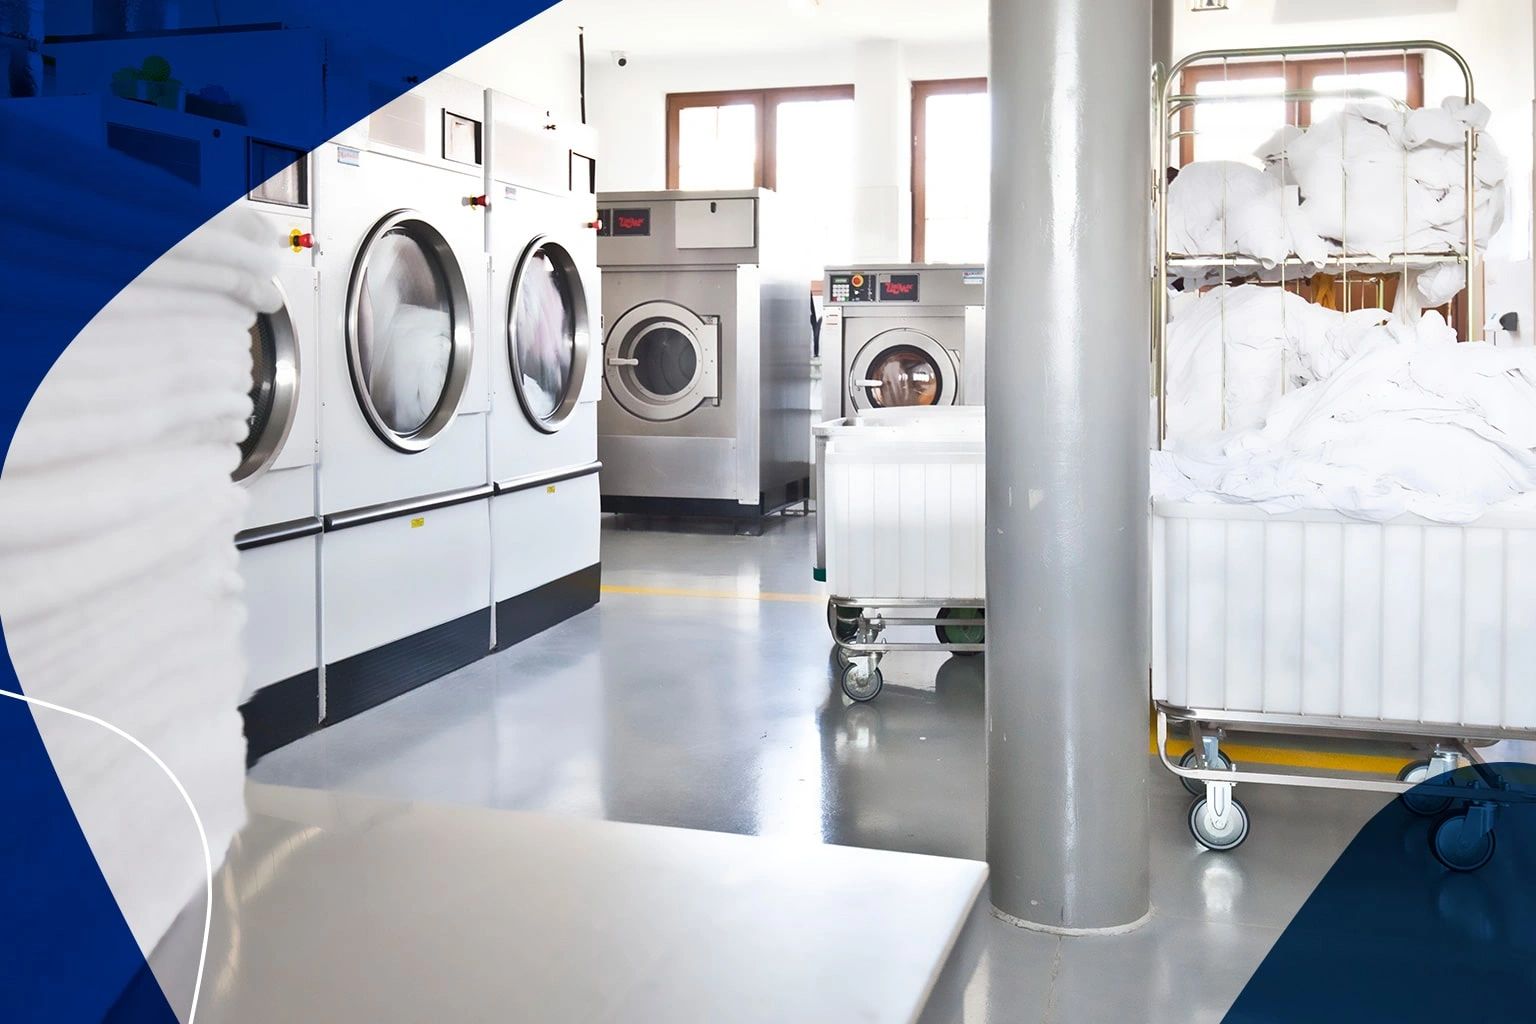 We're here to make laundry effortless for you. Contact us today for all your turnkey laundry needs.